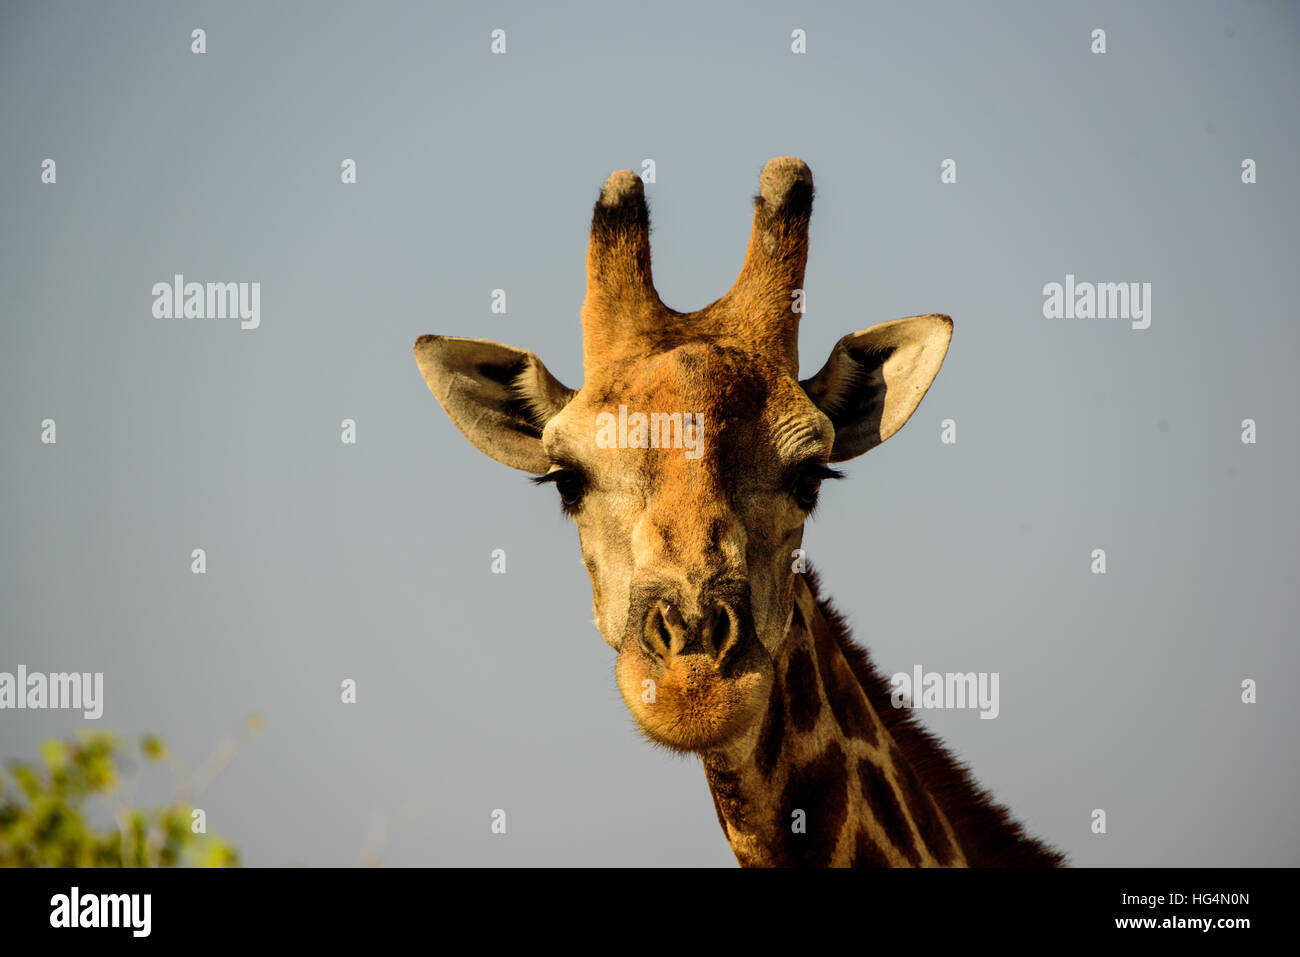 Close up of the face of a Giraffe Stock Photo